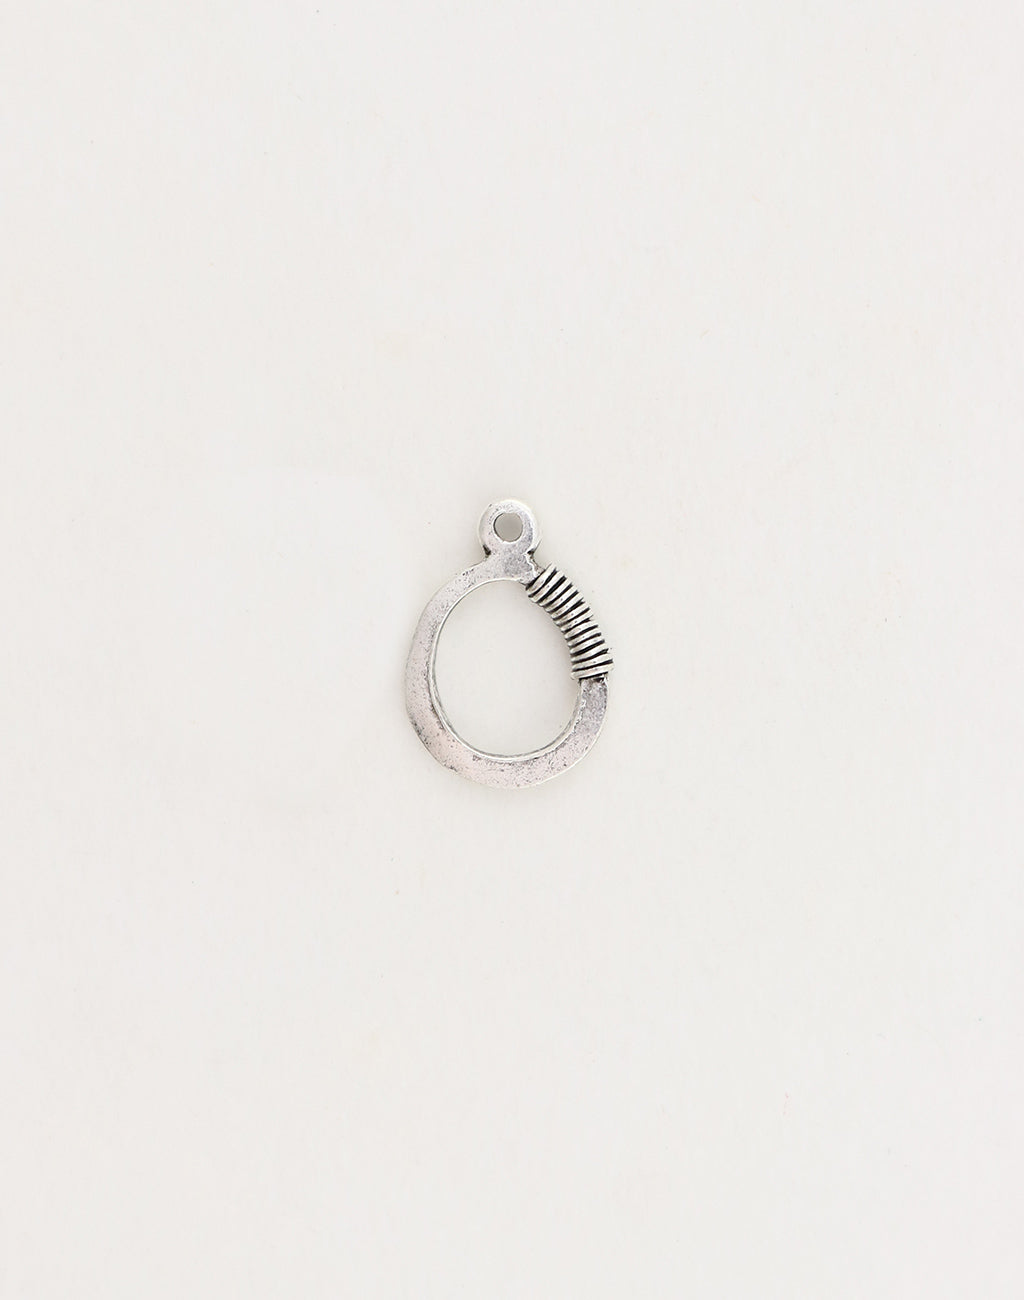 Wire Wrap Ring, 19x14mm, (1pc)